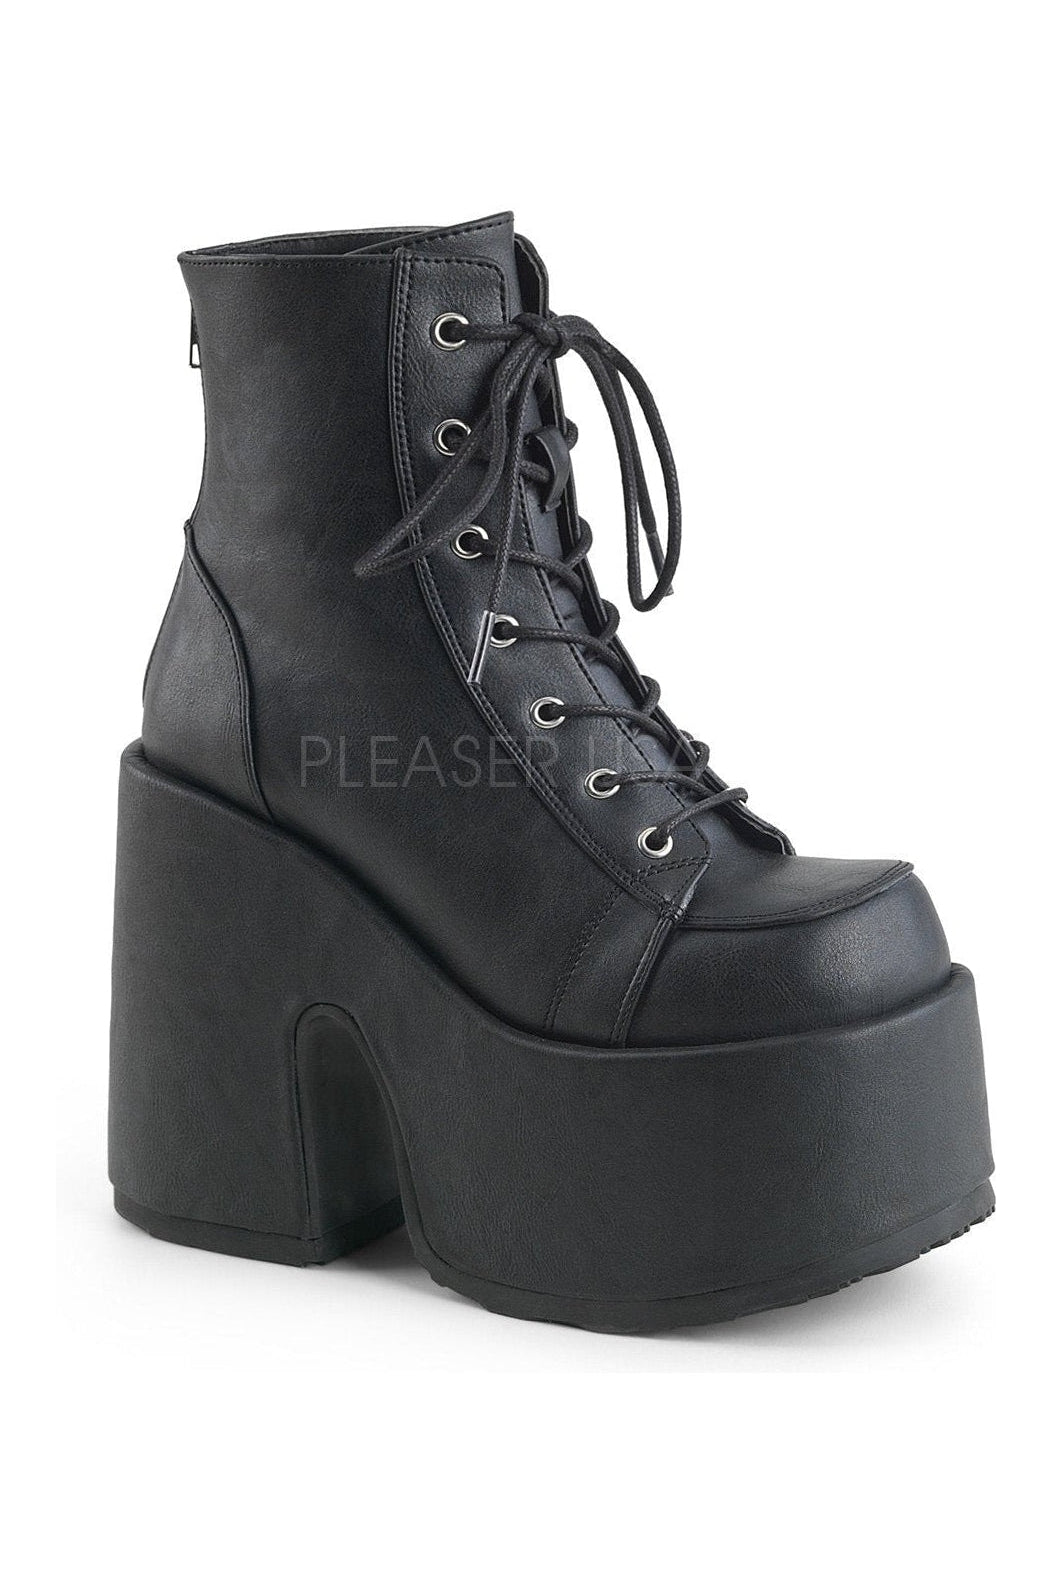 CAMEL-203 Demonia Ankle Boot | Black Faux Leather-Demonia-Black-Ankle Boots-SEXYSHOES.COM